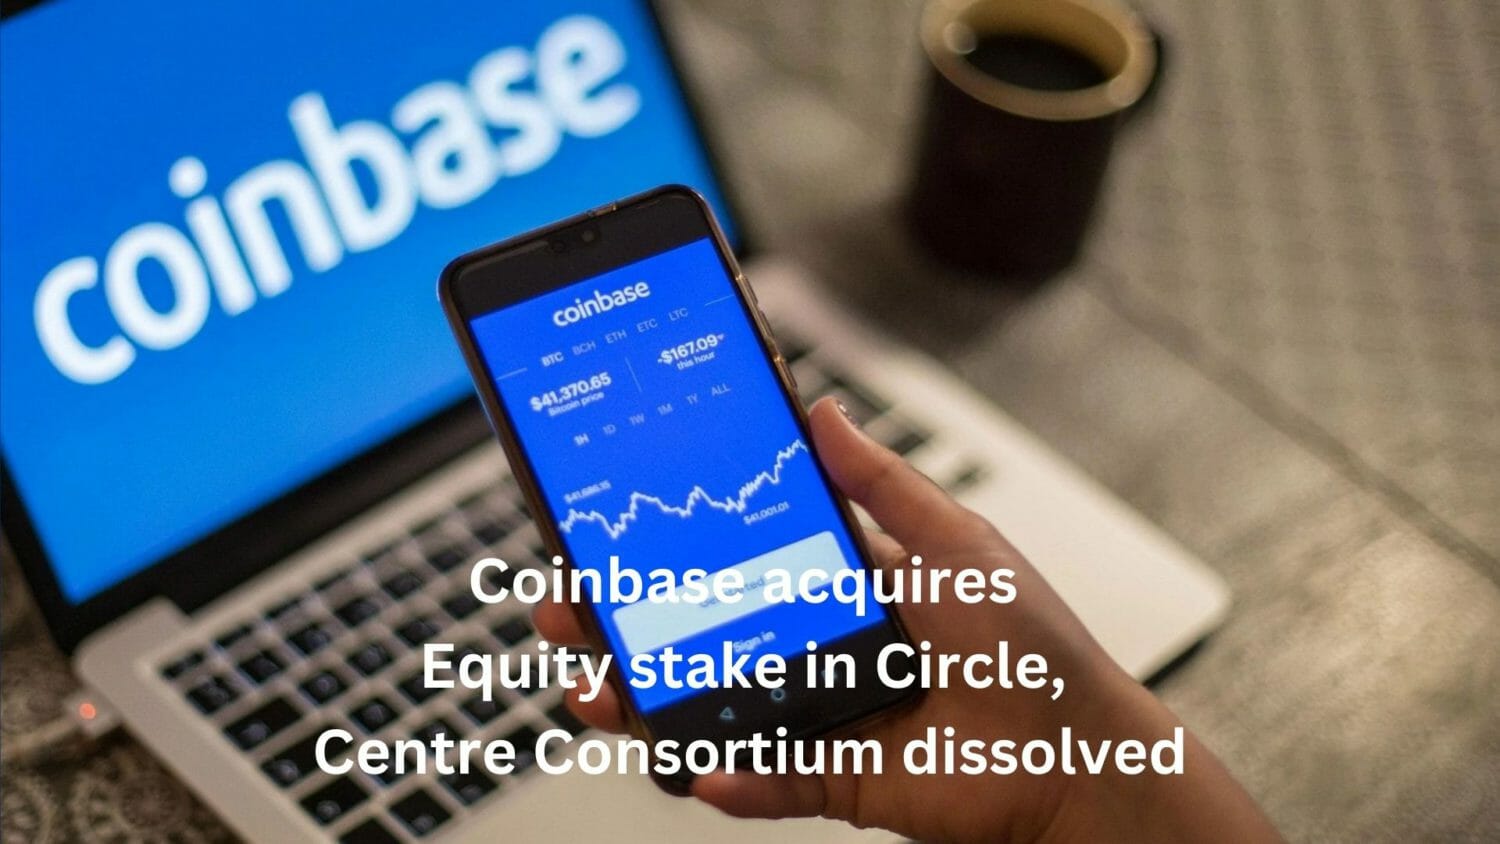 Coinbase Acquires Equity Stake In Circle, Centre Consortium Dissolved